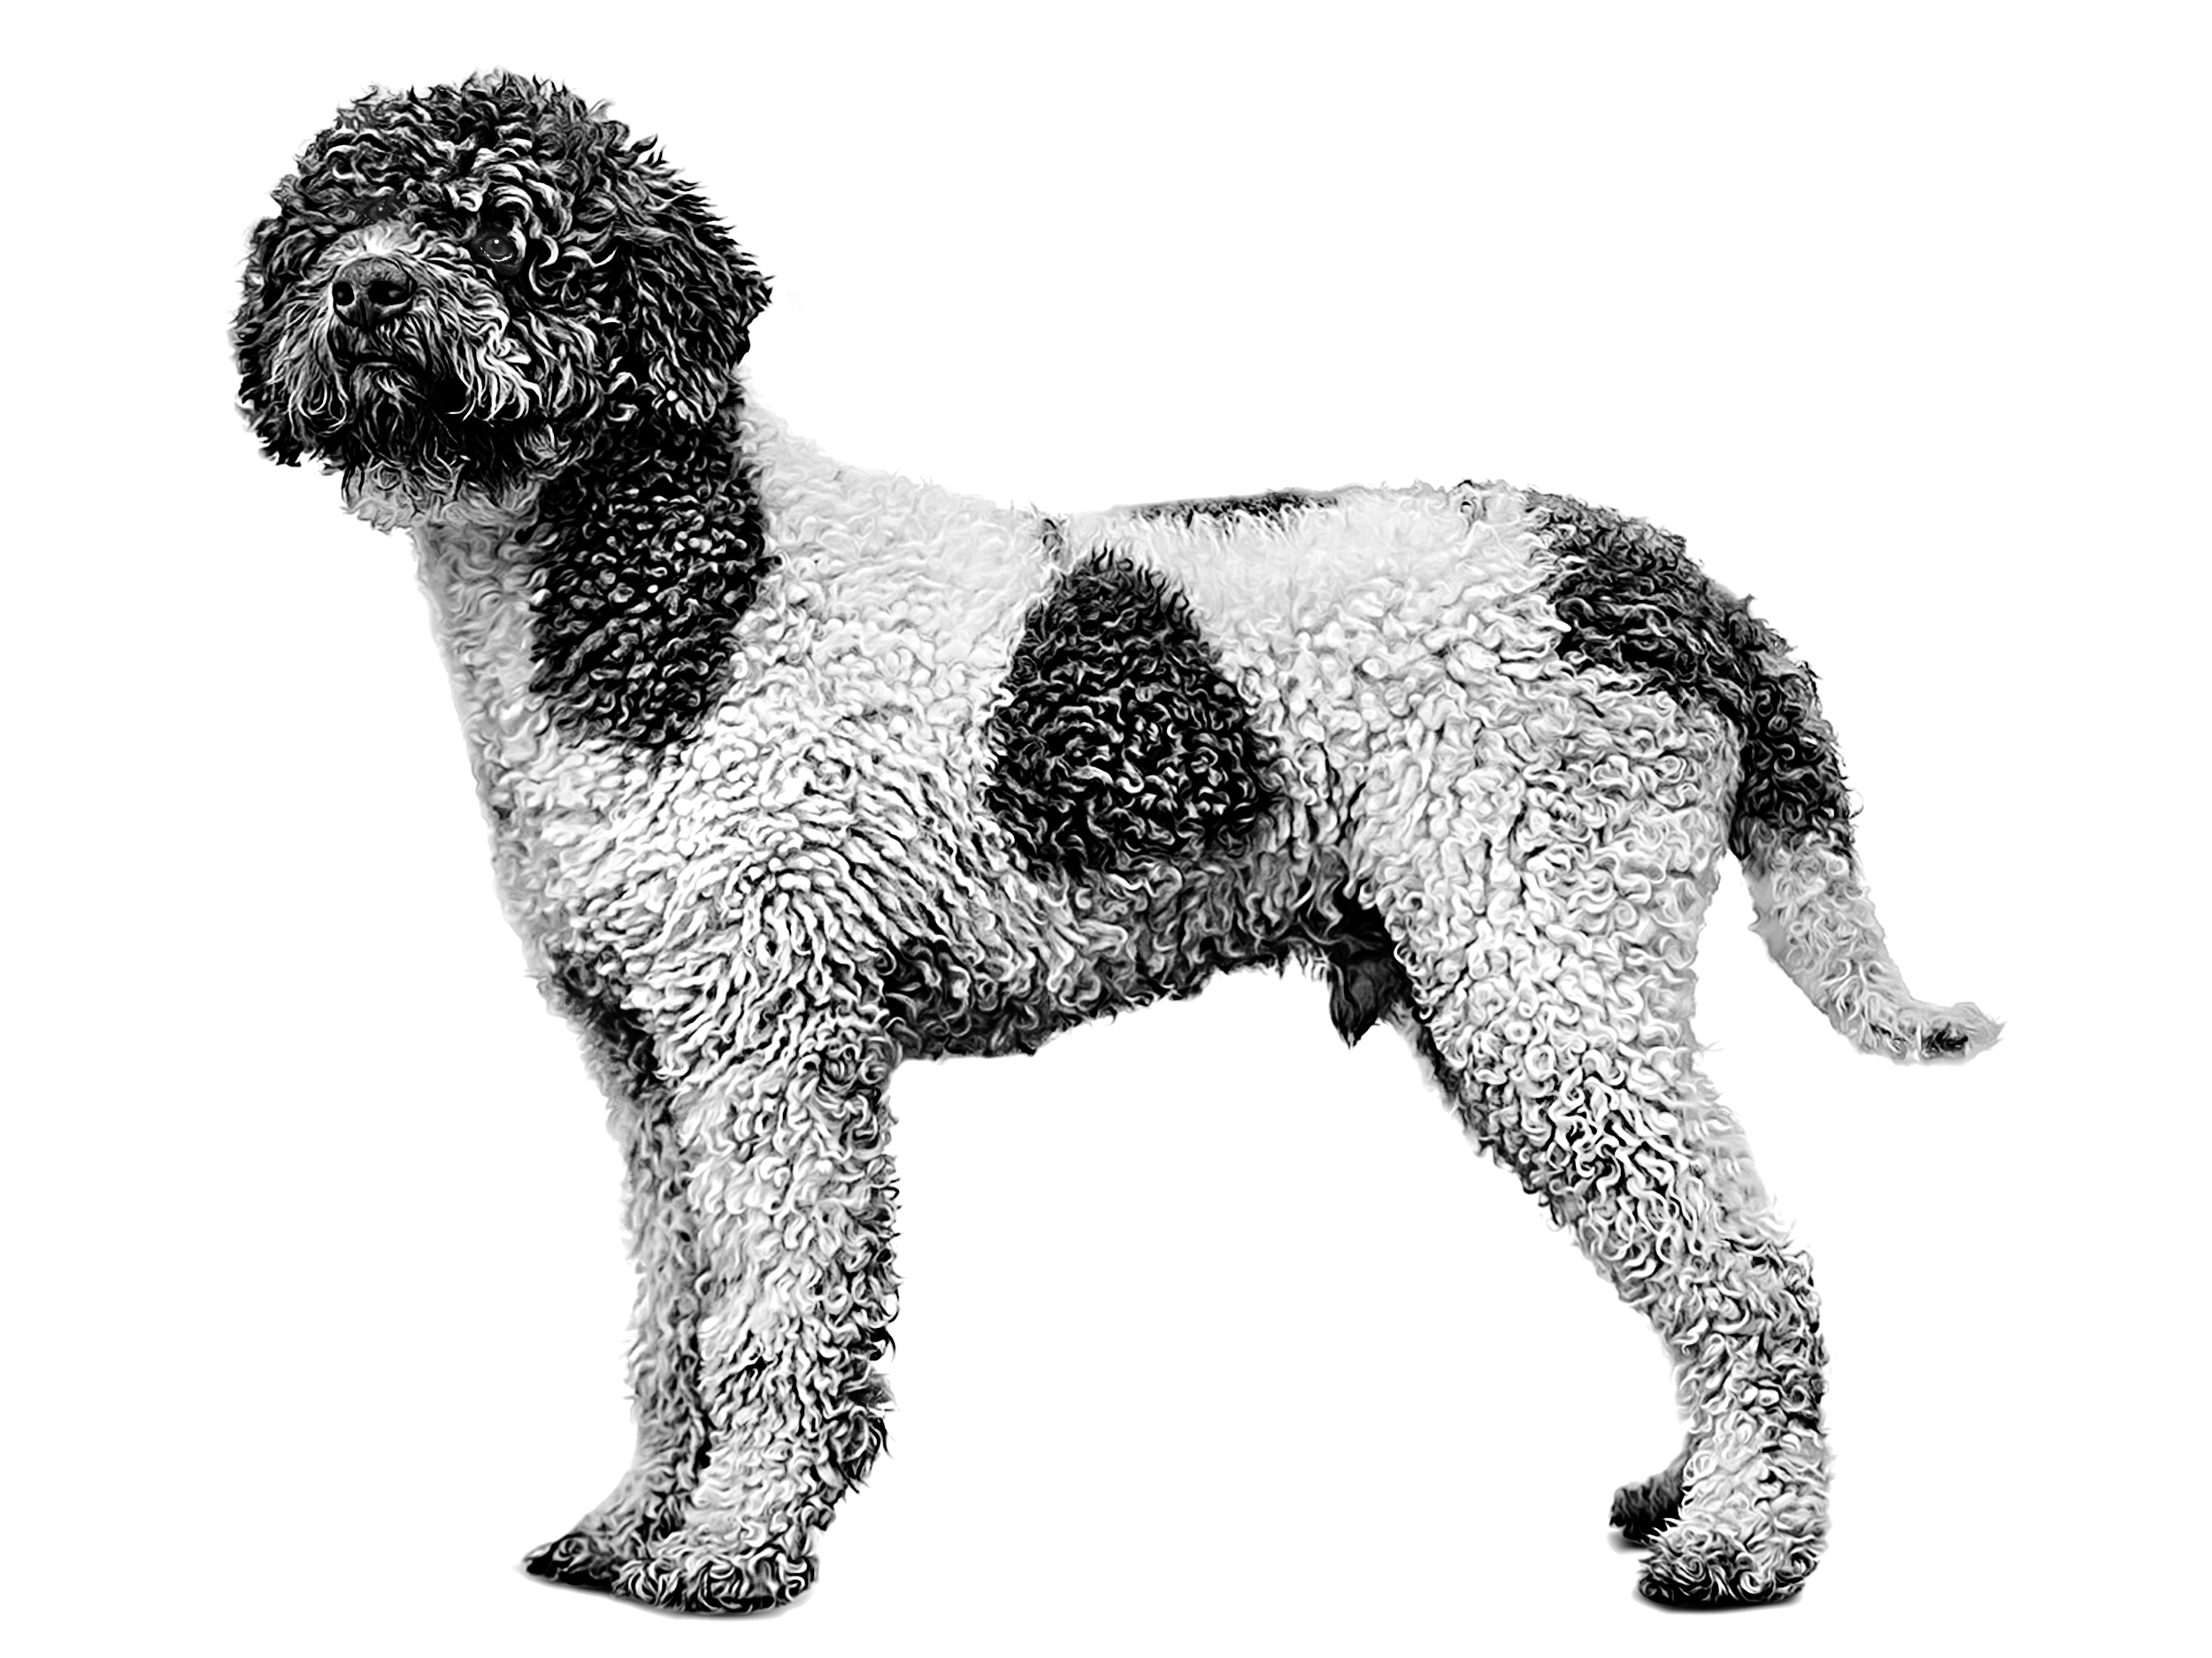 Romagna Water Dog adult black and white